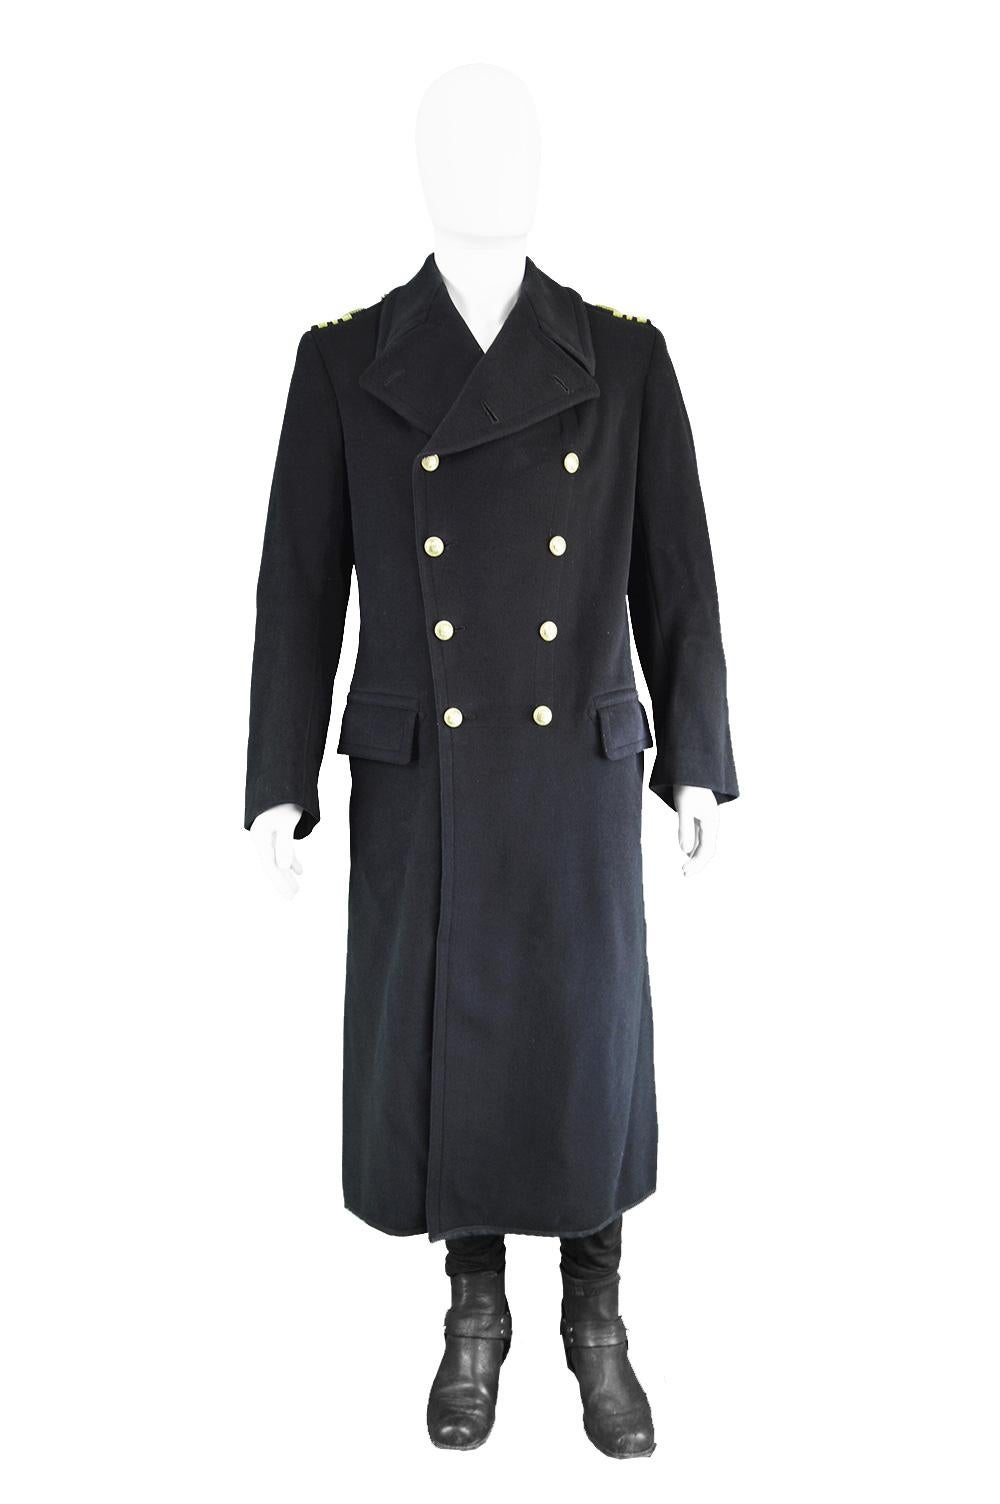 Gieves Vintage 1940s Men's Dark Blue Heavy Wool Naval Military Greatcoat

Estimated Size: Men's Large. Please check measurement's 
Chest - 44” / 112cm (allow roughly 2-4